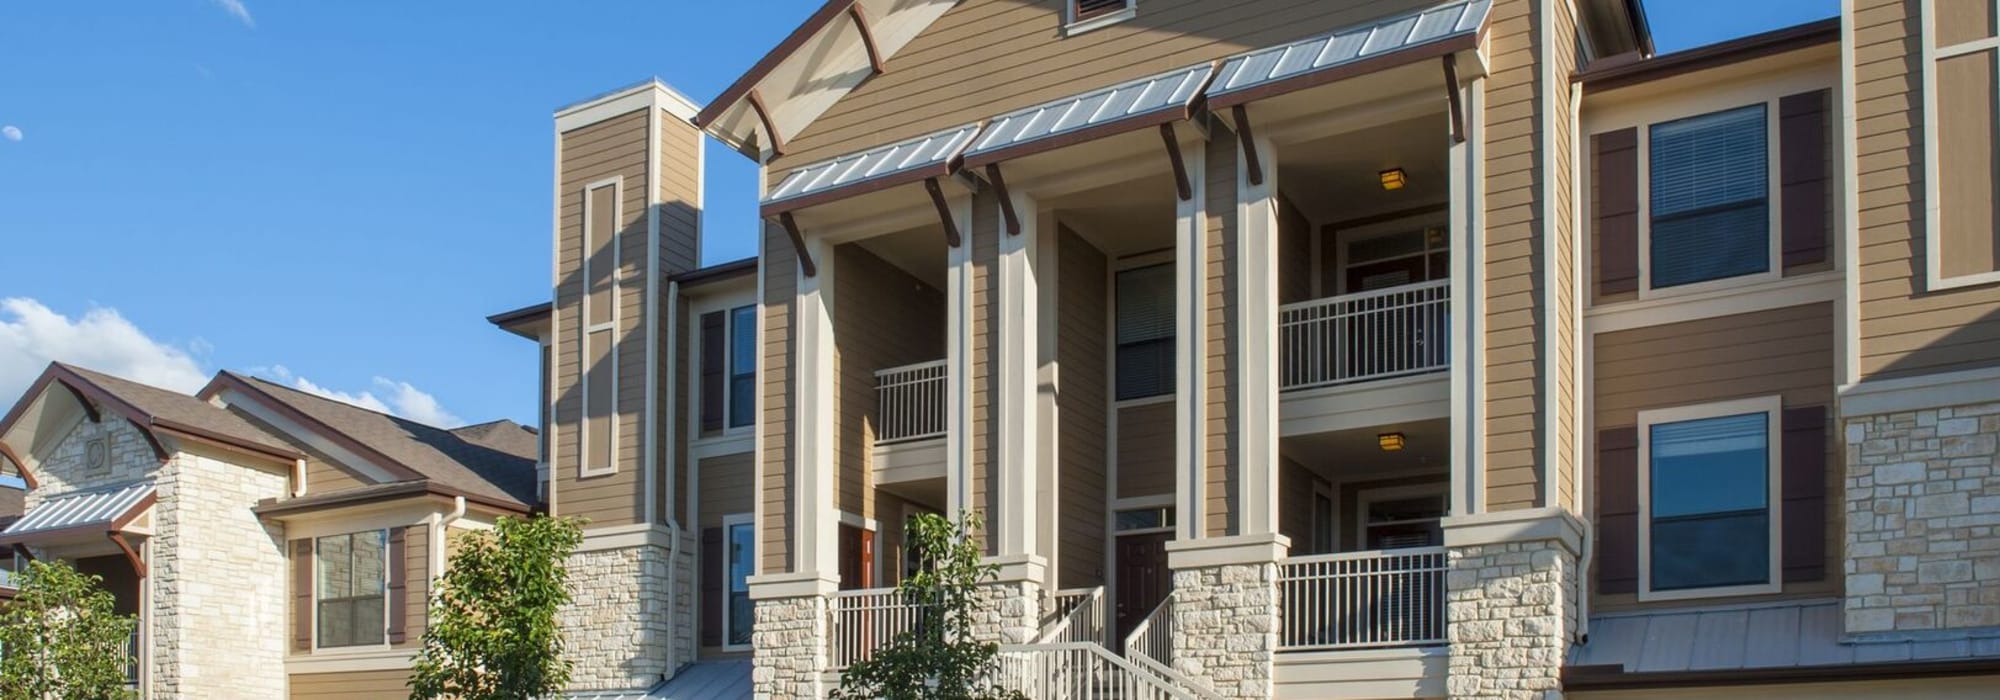 second and third story balconies outside at The Crossing at Katy Ranch in Katy, Texas